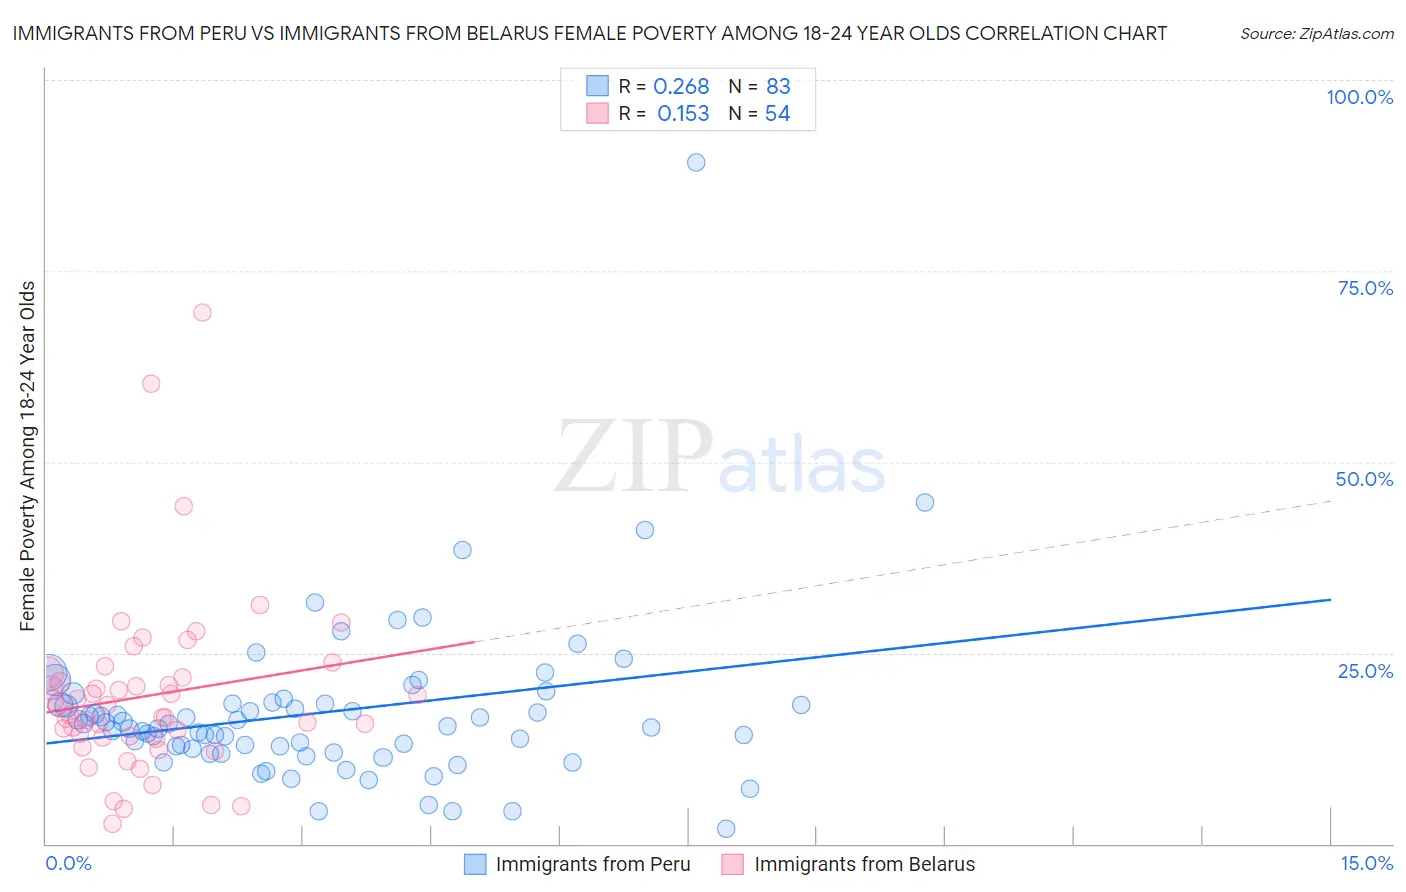 Immigrants from Peru vs Immigrants from Belarus Female Poverty Among 18-24 Year Olds